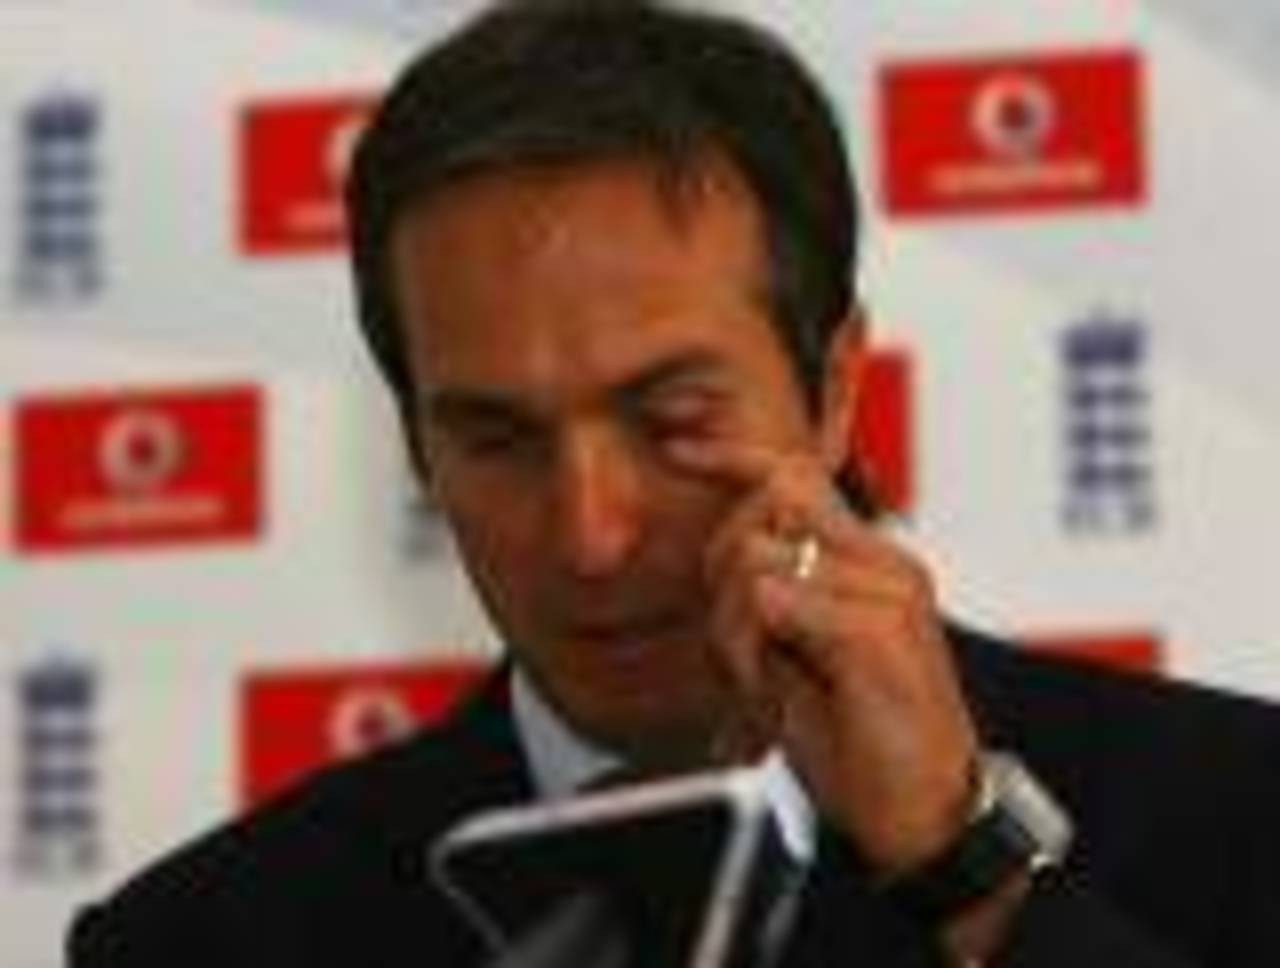 Michael Vaughan struggles to hold his emotions as he resigns as England captain, Loughborough, August 3, 2008